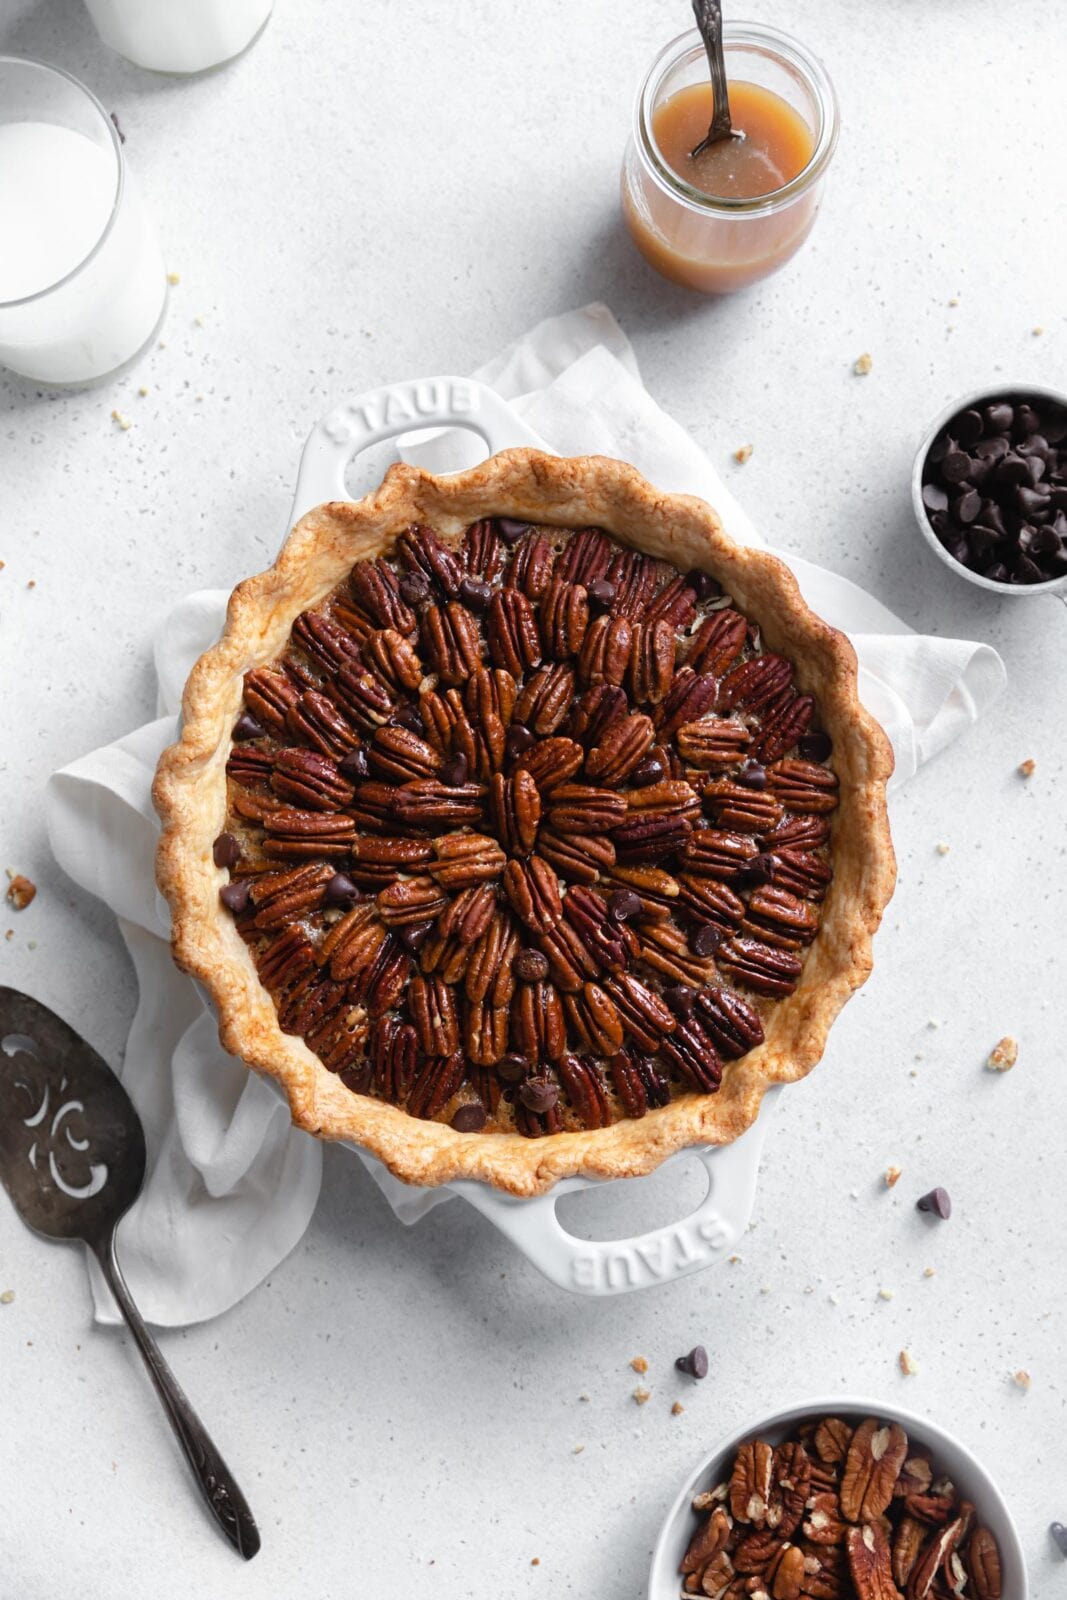 turtle pecan pie with chocolate and caramel